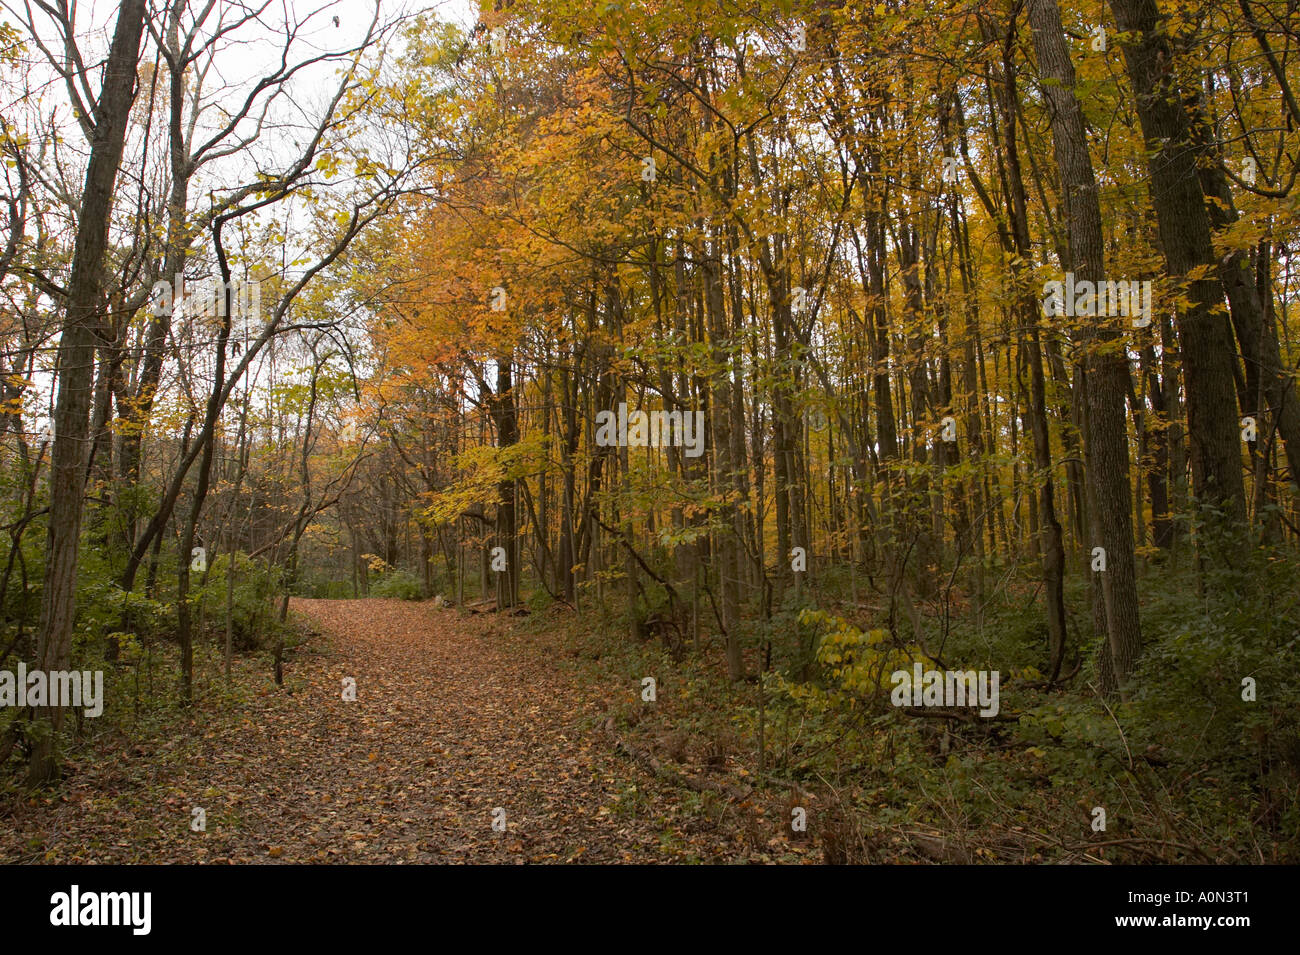 A path in an autumn forest with orange, yellow, and green leaves. Stock Photo